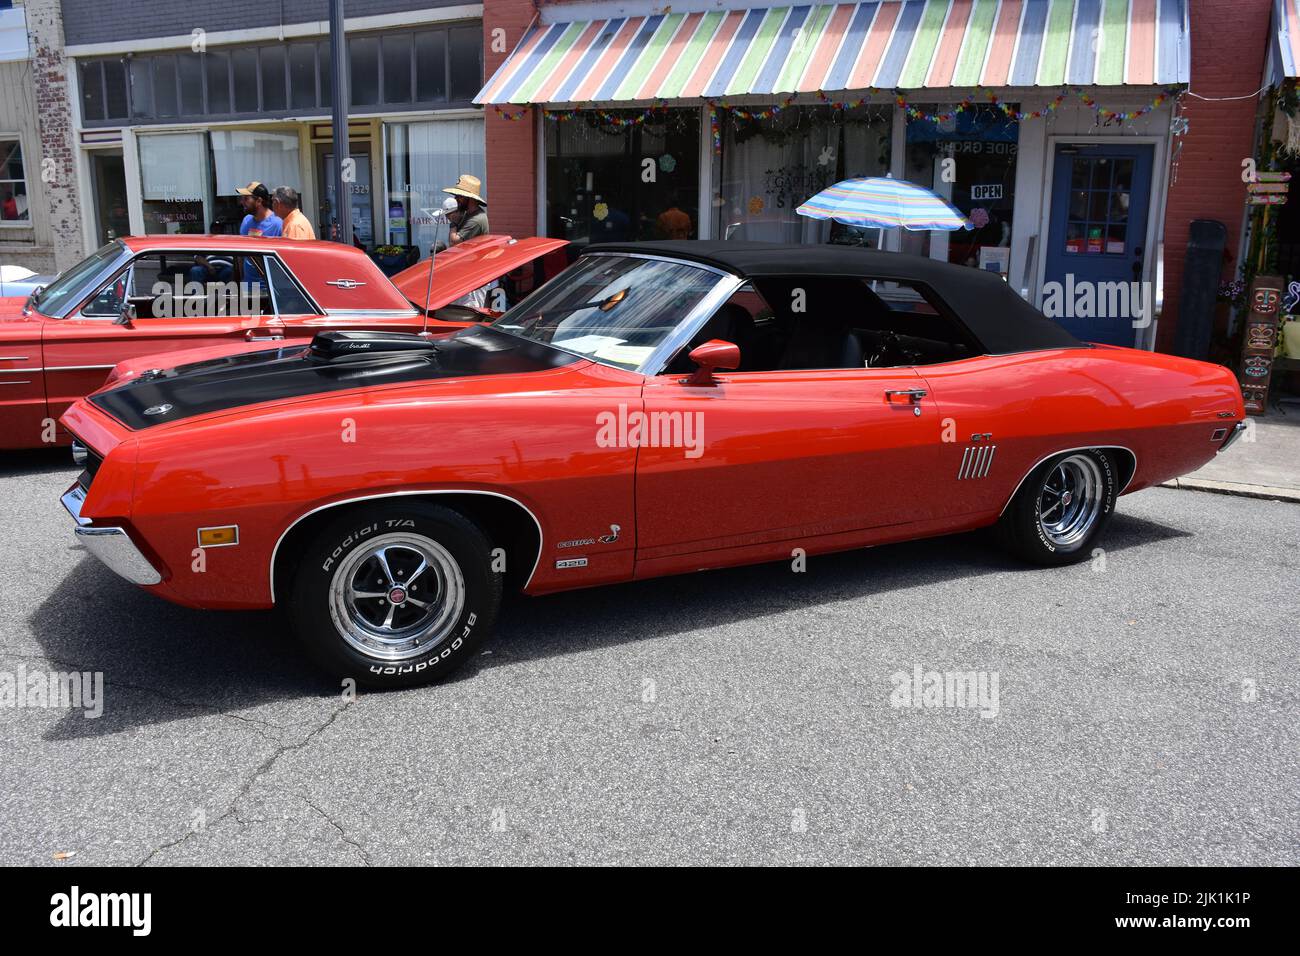 A 1970 Ford Torino GT 429 Cobra Jet on display at a car show. Stock Photo